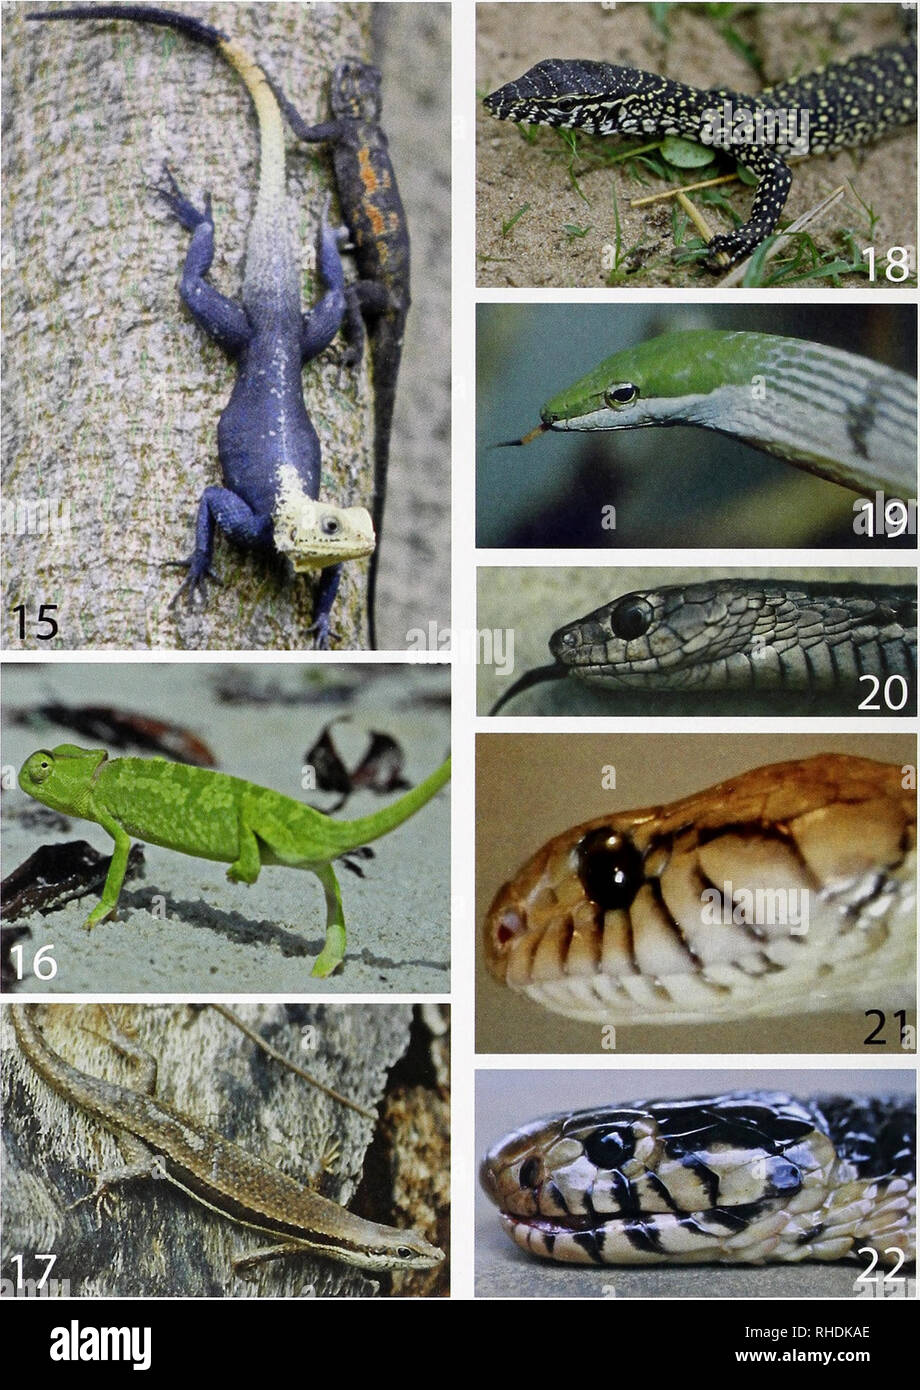 . Bonn zoological bulletin. Zoology. 266 Mark Auliya et al.. Figs 15-22. 15. Agama picticauda, left male, right female; 16. Chaiuaeleo gracilis, Orango Isl.; 17. Truchylepis affinis, Bubaque IsL; 18. juv. Varamis niloticiis, Bubaque Isl.; 19. Thelotornis kirtlandii, Bubaque Isl.; 20. Thrasops occidentalis, Bubaque Isl.; 21. Toxicodryas blandingii, Bubaque Isl.; 22. Naja melanoleuca, Bubaque Isl. Bonn zoological Bulletin 61 (2): 255-281 ®ZFMK. Please note that these images are extracted from scanned page images that may have been digitally enhanced for readability - coloration and appearance of Stock Photo